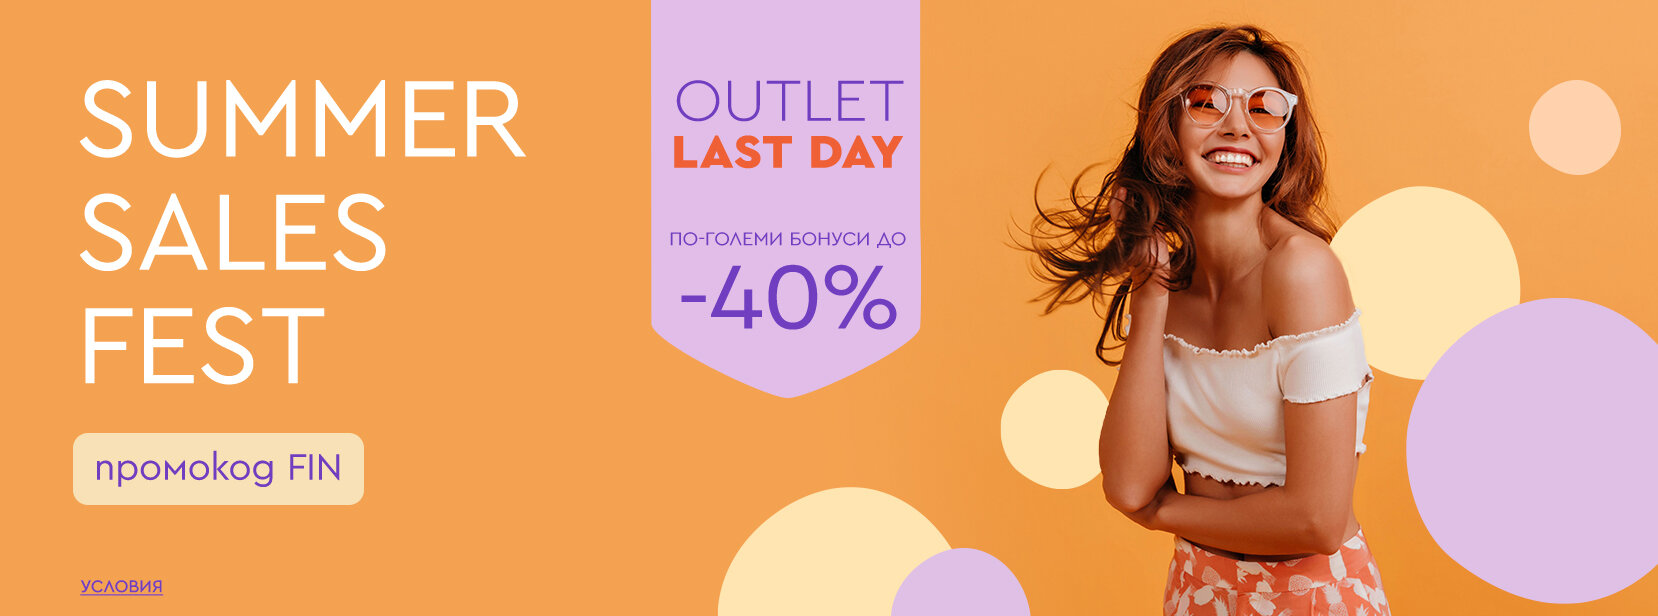 "SUMMER SALES FEST LAST DAY

"